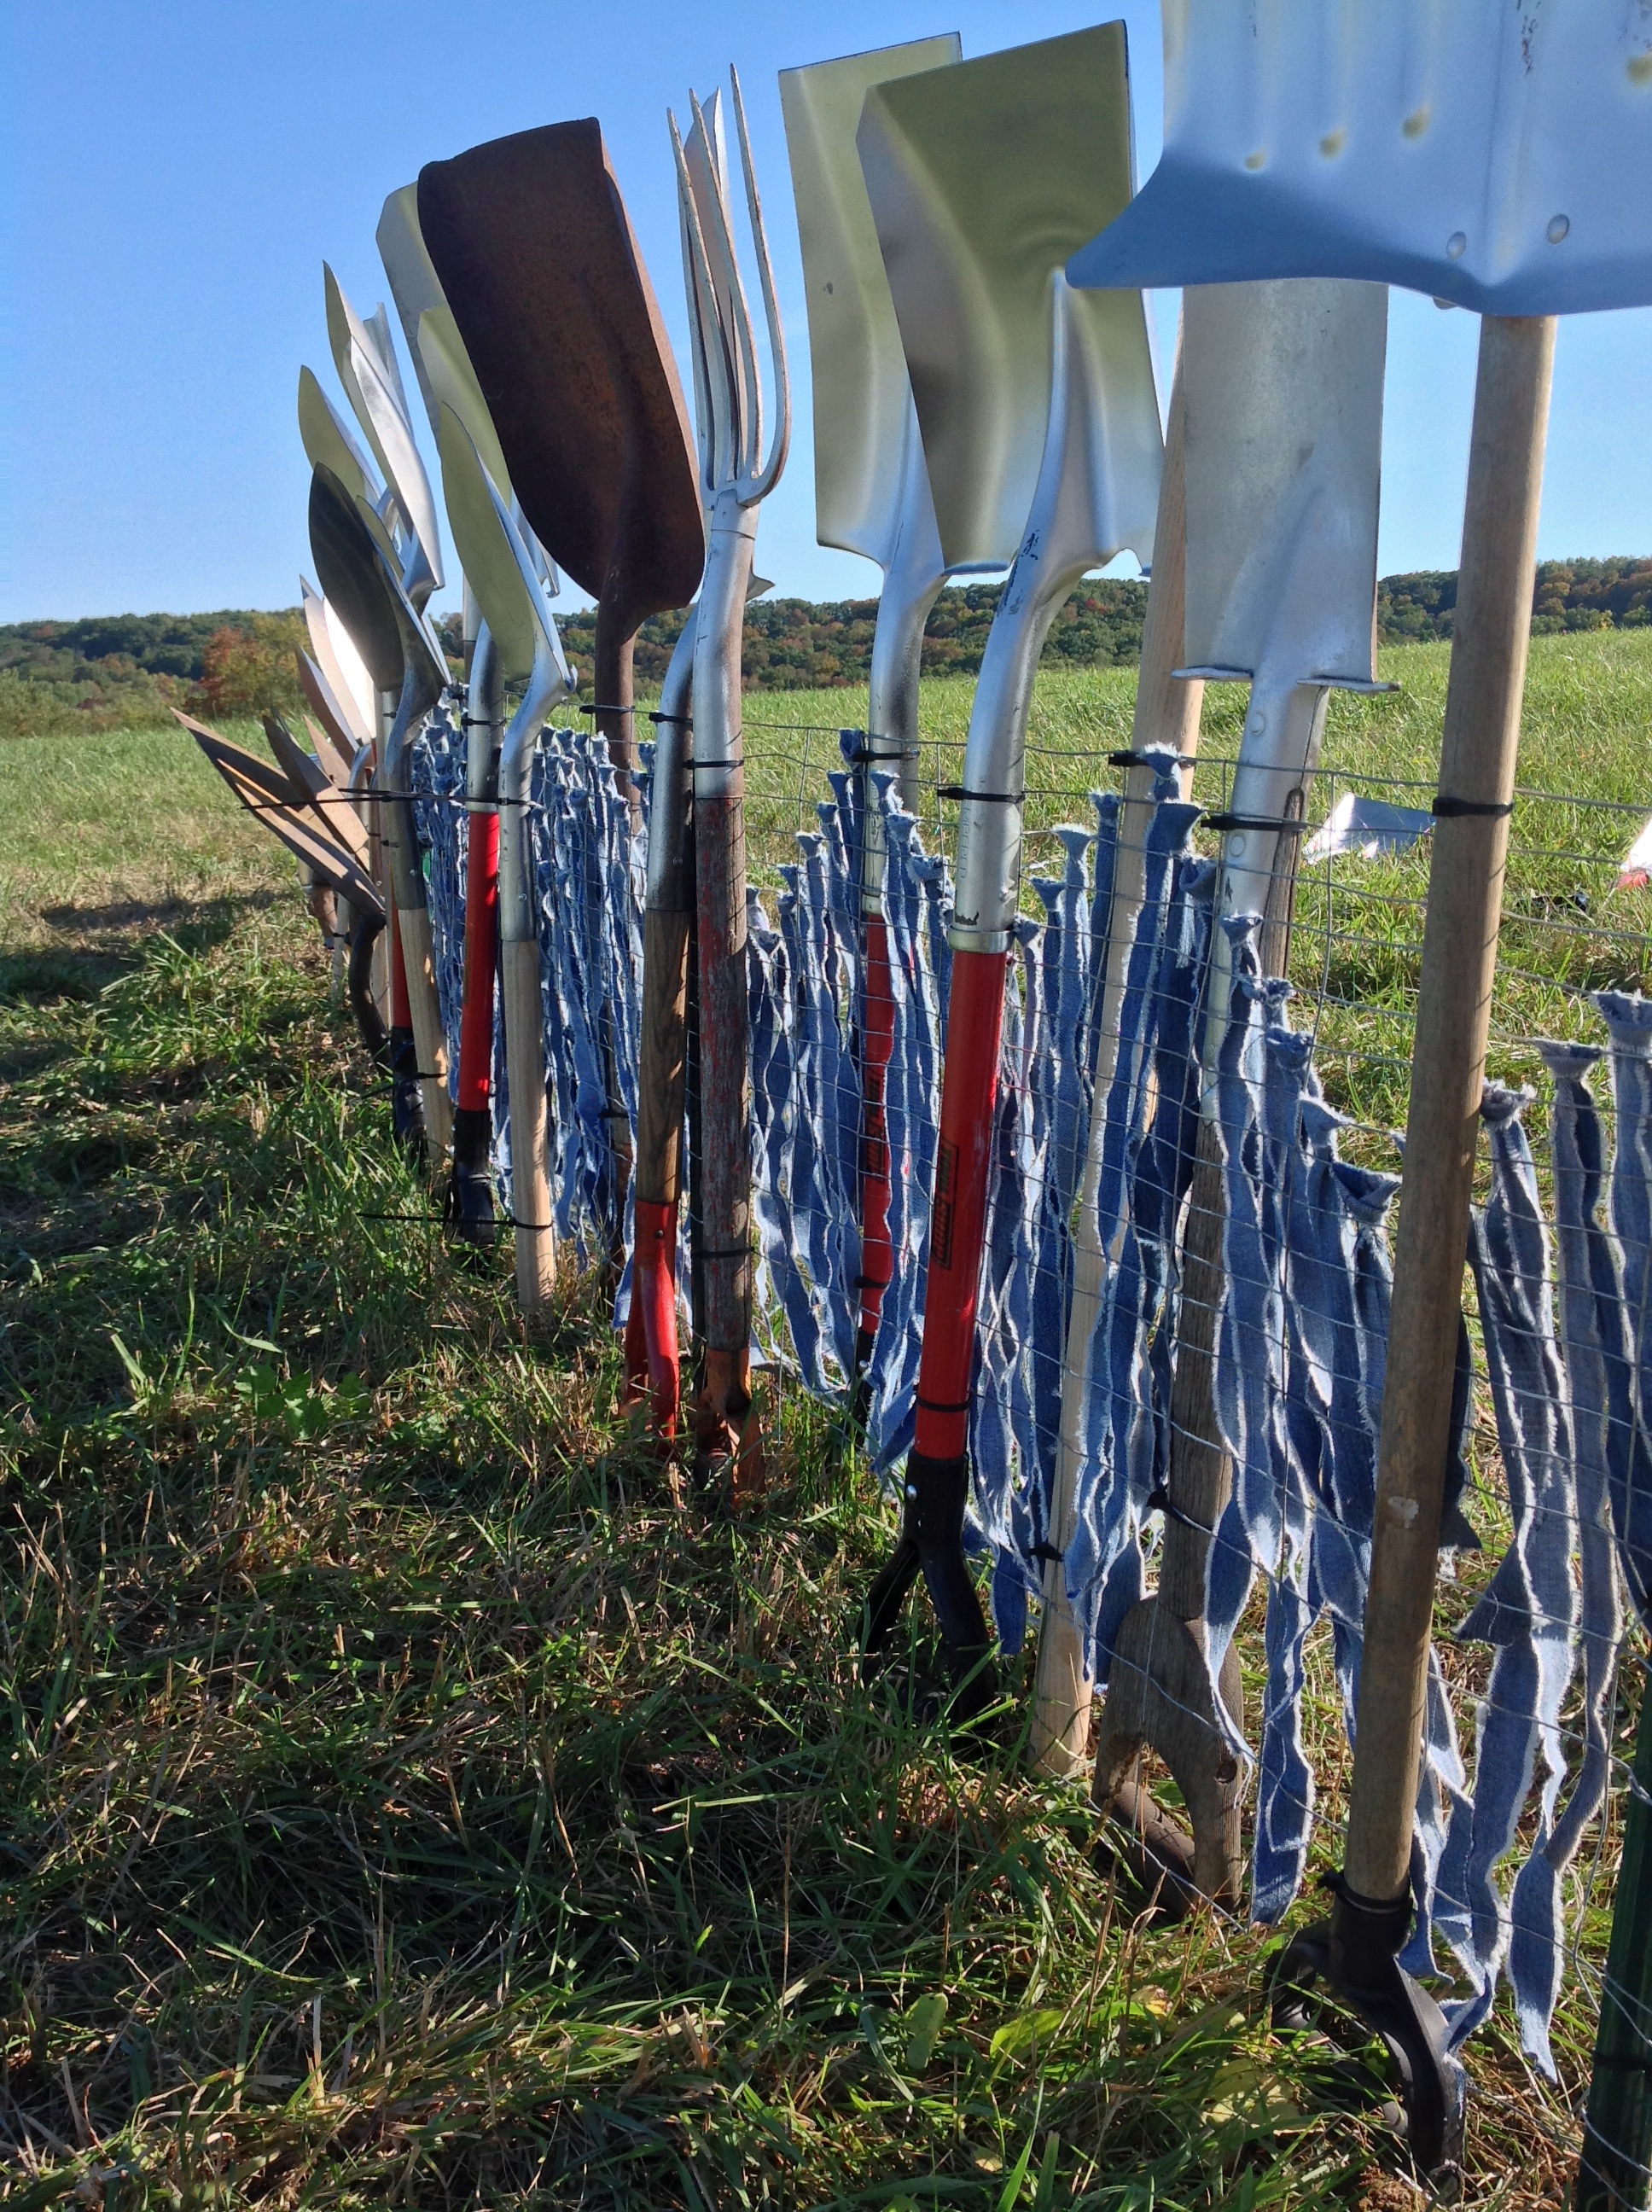  2013  Site specific temporary installation as part of Fermentaion Fest's Farm Art D-tour in Reedsburg, WI.  Approximately 500 shovels to make a 125 foot fence. Denim for tithing was donated, added by viewers.  Photography by author and by Florence K